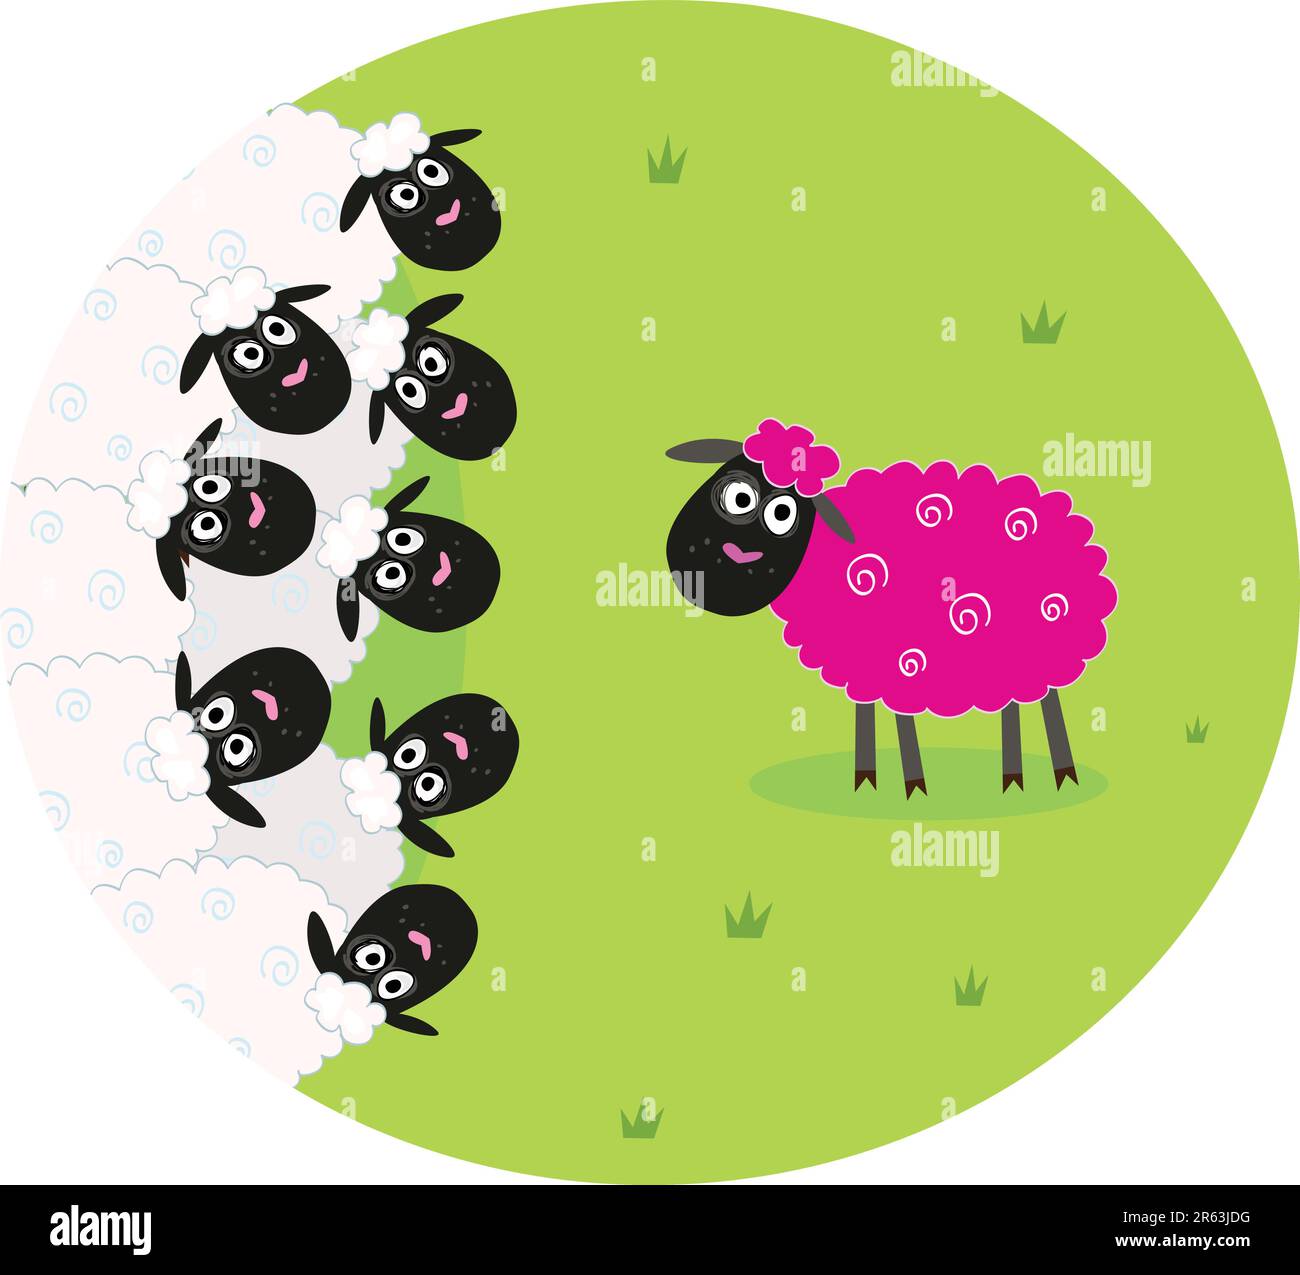 Stylized vector illustration of sheep family. The pink sheep is different and is standing alone. New hair color or genetic modification? Stock Vector